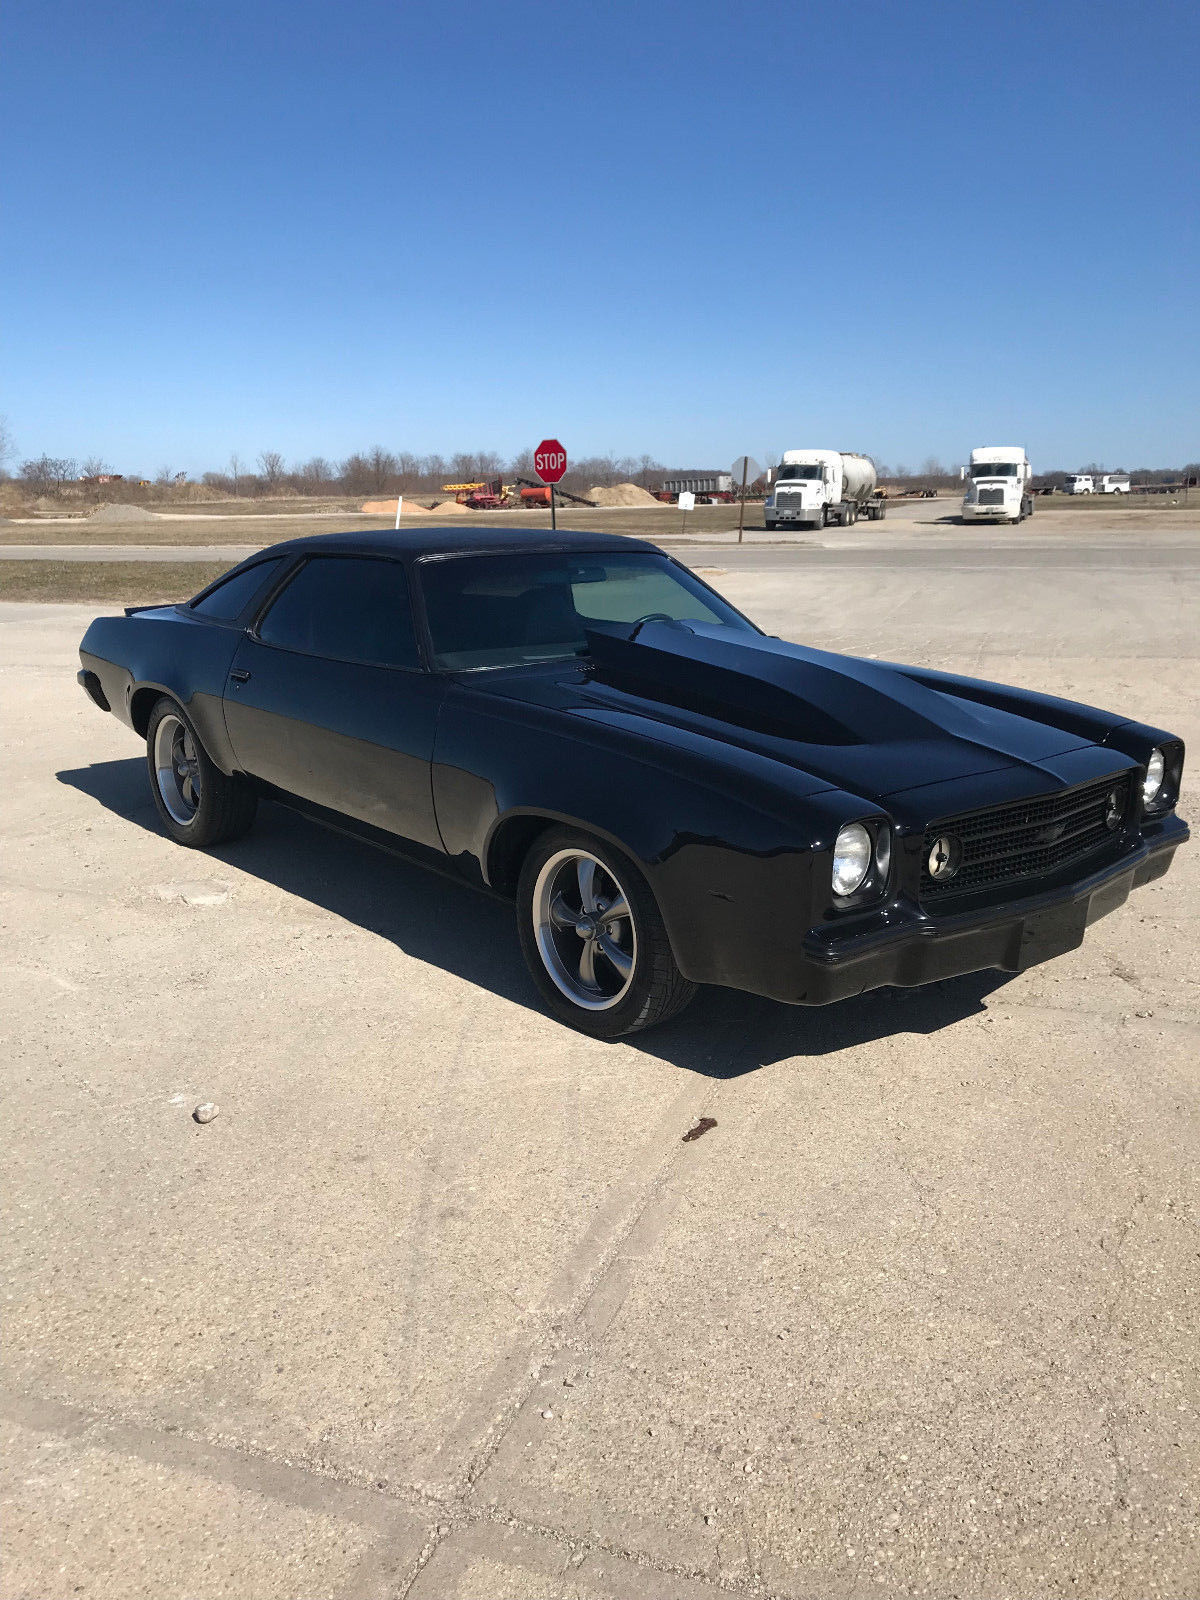 bangshift com this 1973 chevrolet chevelle laguna is a visual ten just a nip and tuck help so much bangshift com 1973 chevrolet chevelle laguna